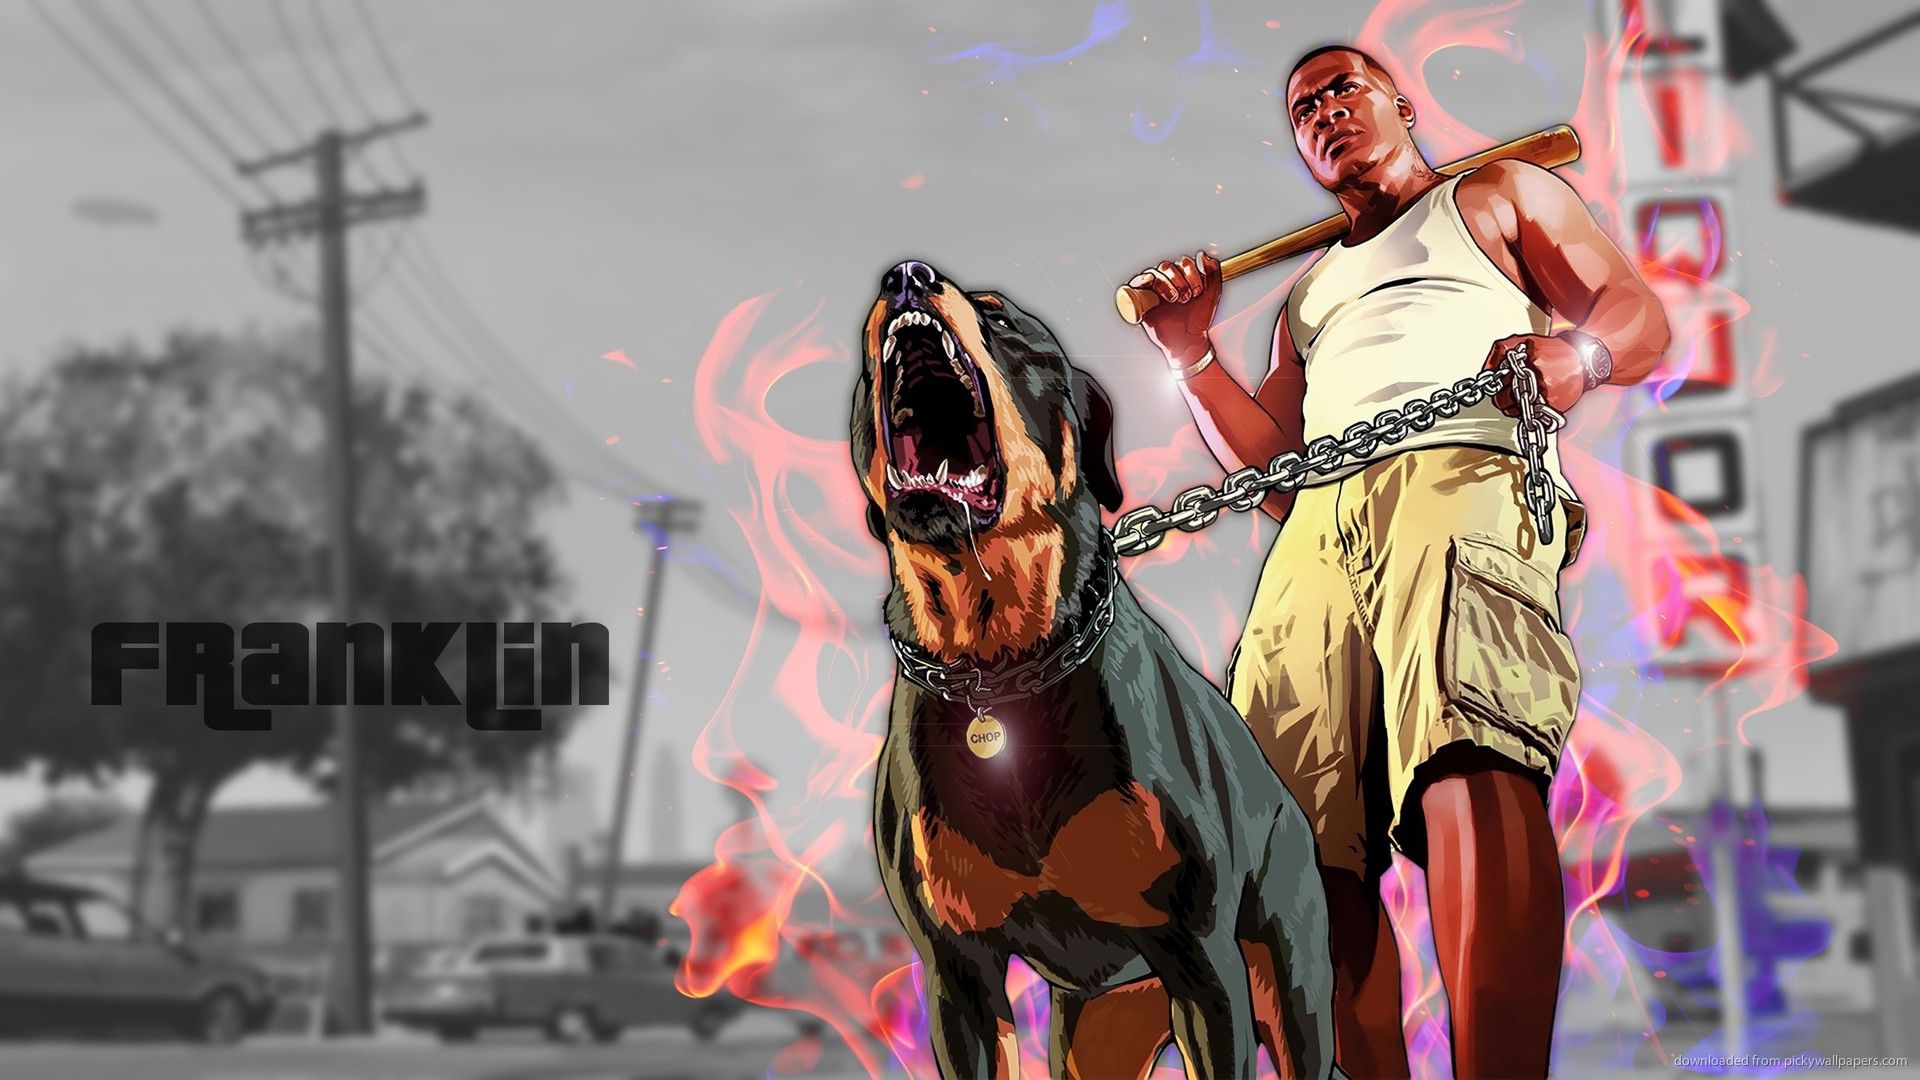 Free download GTA 5 Franklin on fire for 1920x1080 [1920x1080] for your Desktop, Mobile & Tablet. Explore GTA 5 Wallpaper 2560x1440. Grand Theft Auto Wallpaper, Gta 4 Wallpaper, GTA 5 Girl Wallpaper